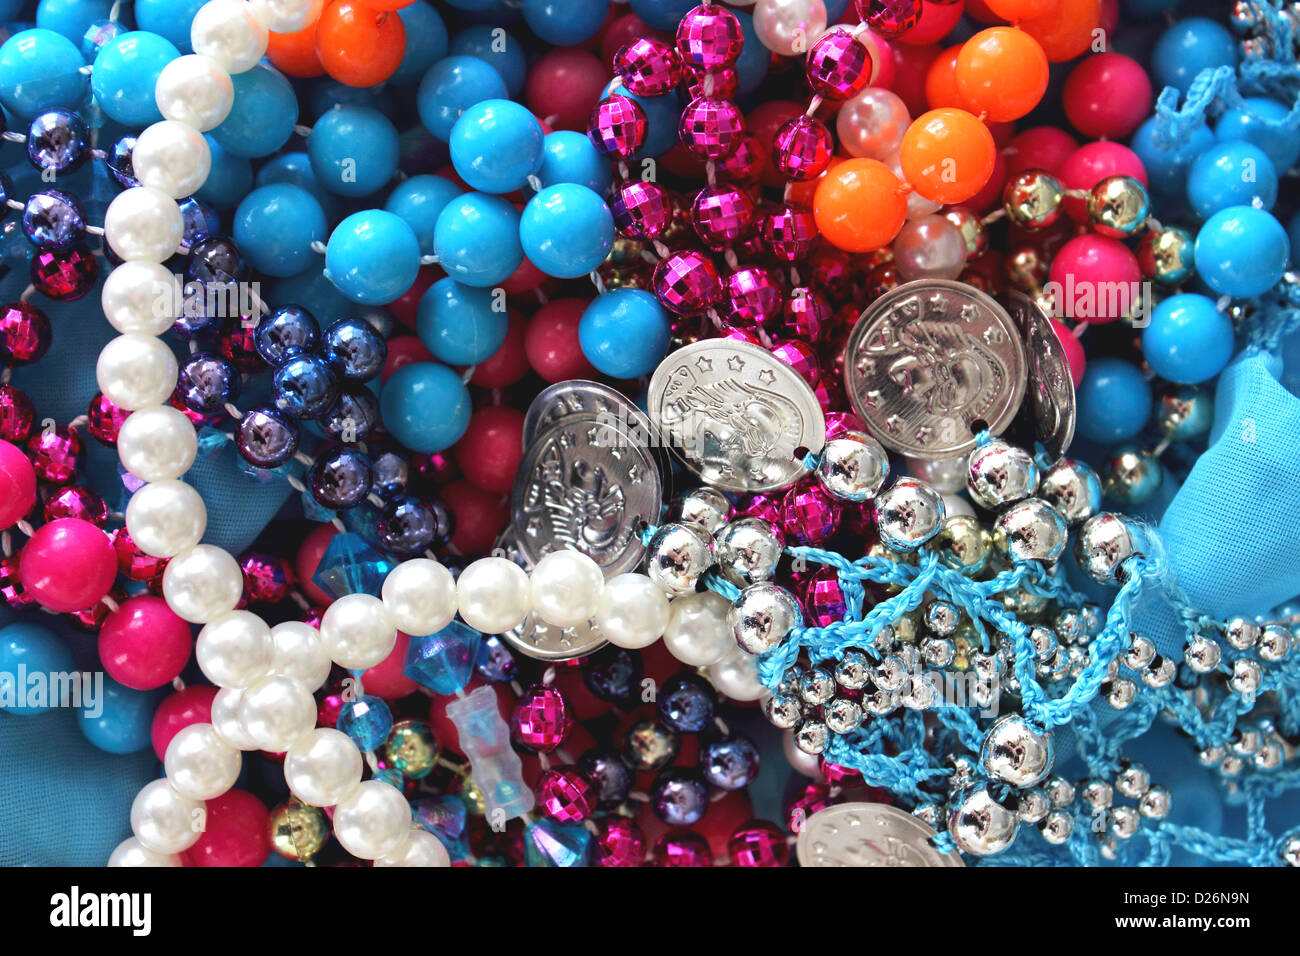 A colorful pile of Mardi Gras beads and bangles Stock Photo